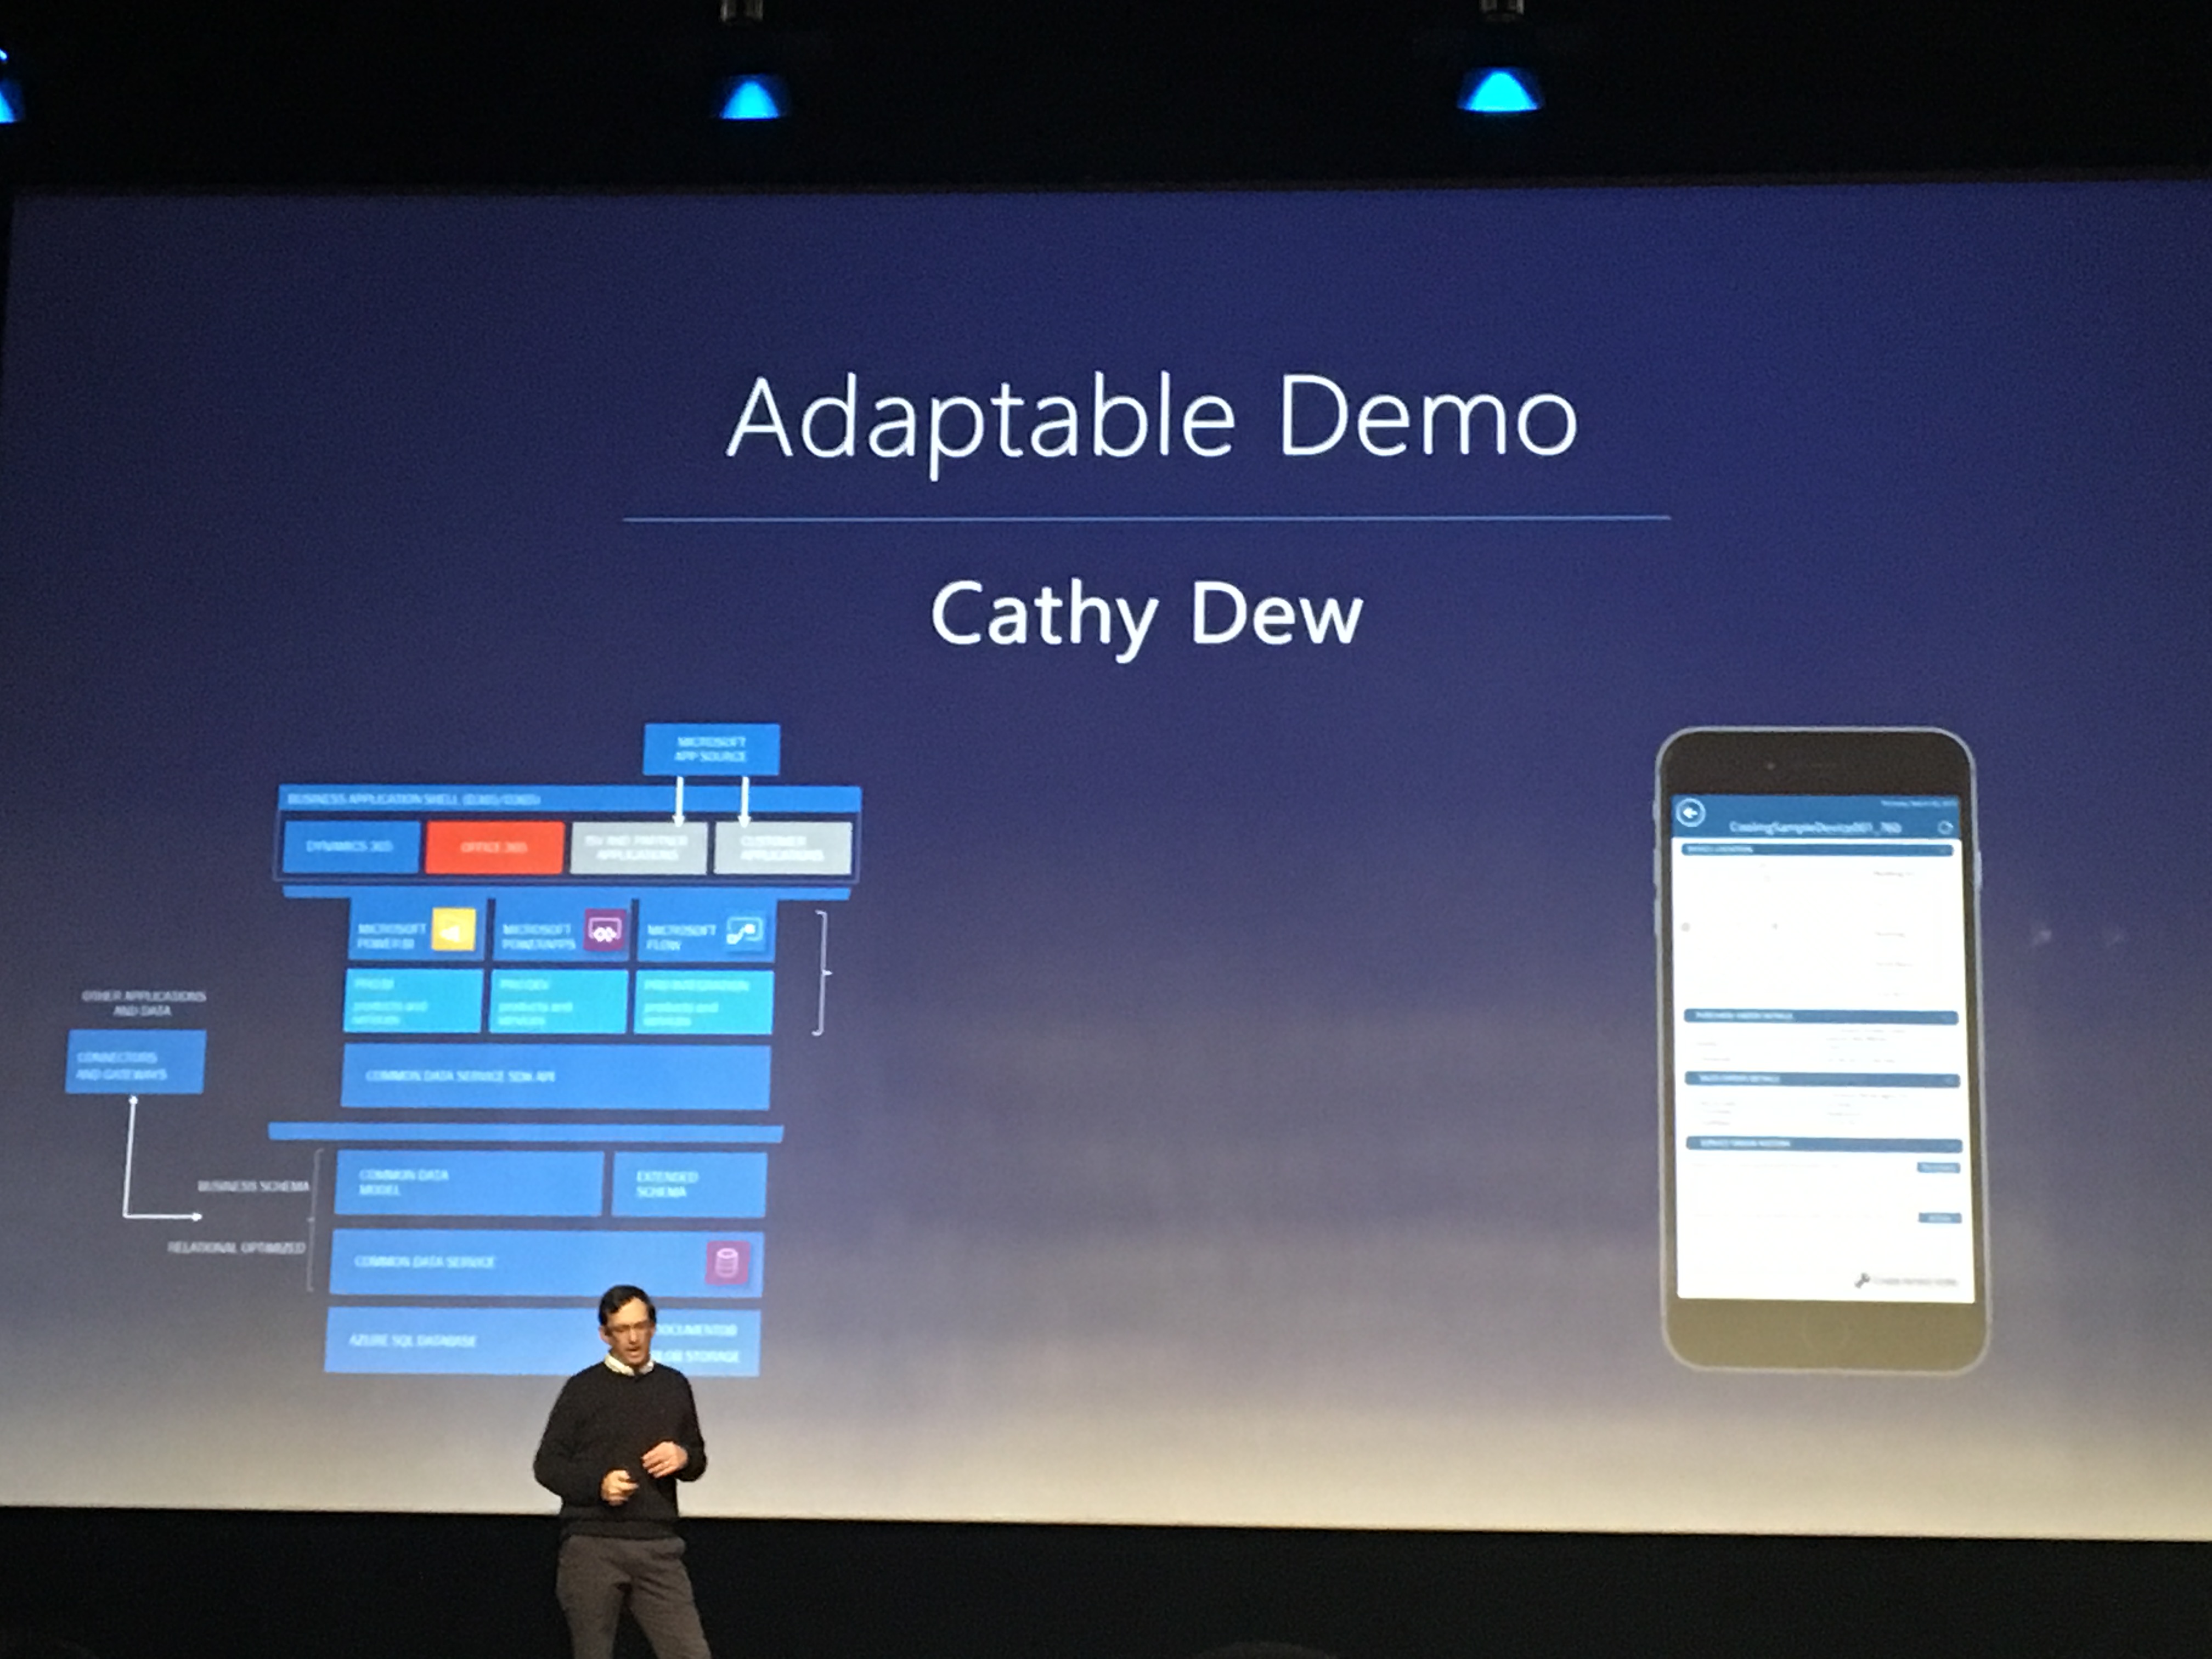 Adaptable Demo by Ms. Cathy Dew